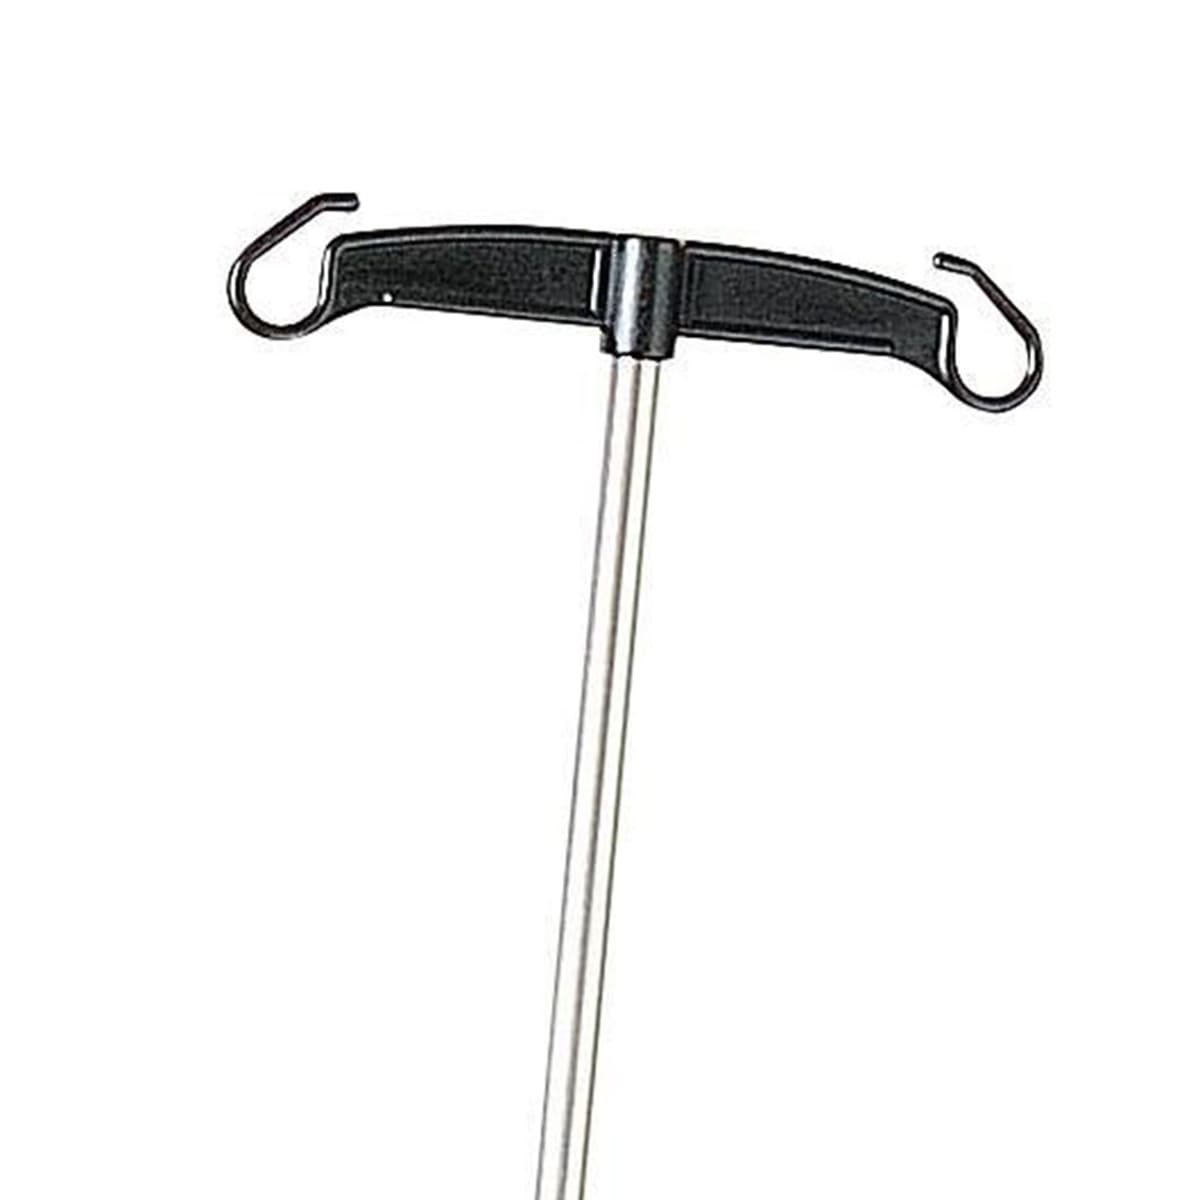 Stainless steel infusion stand diam. 16mm, 2 plastic hooks, without clamp